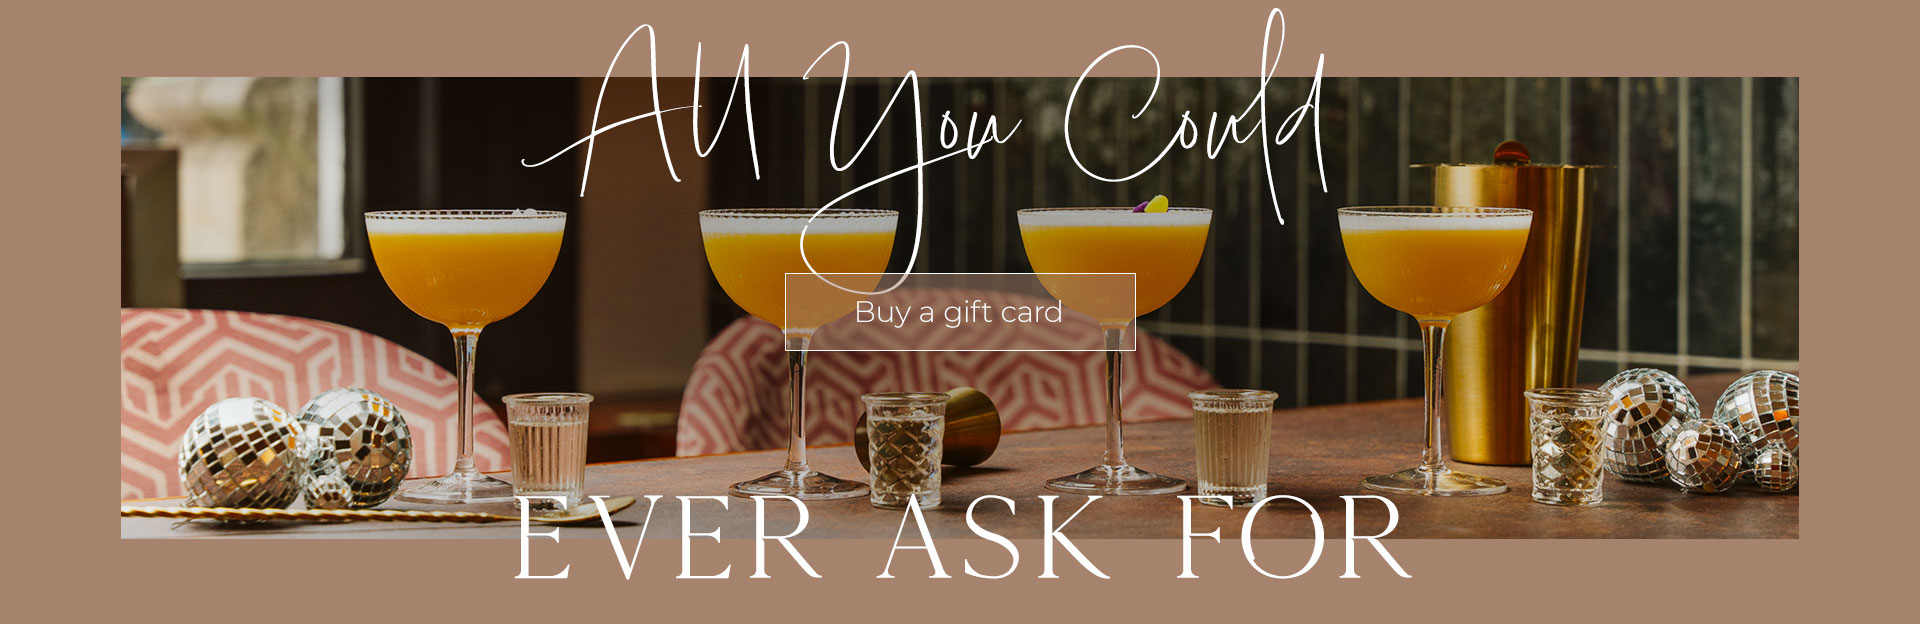 All Bar One Gift Cards at All Bar One Holborn